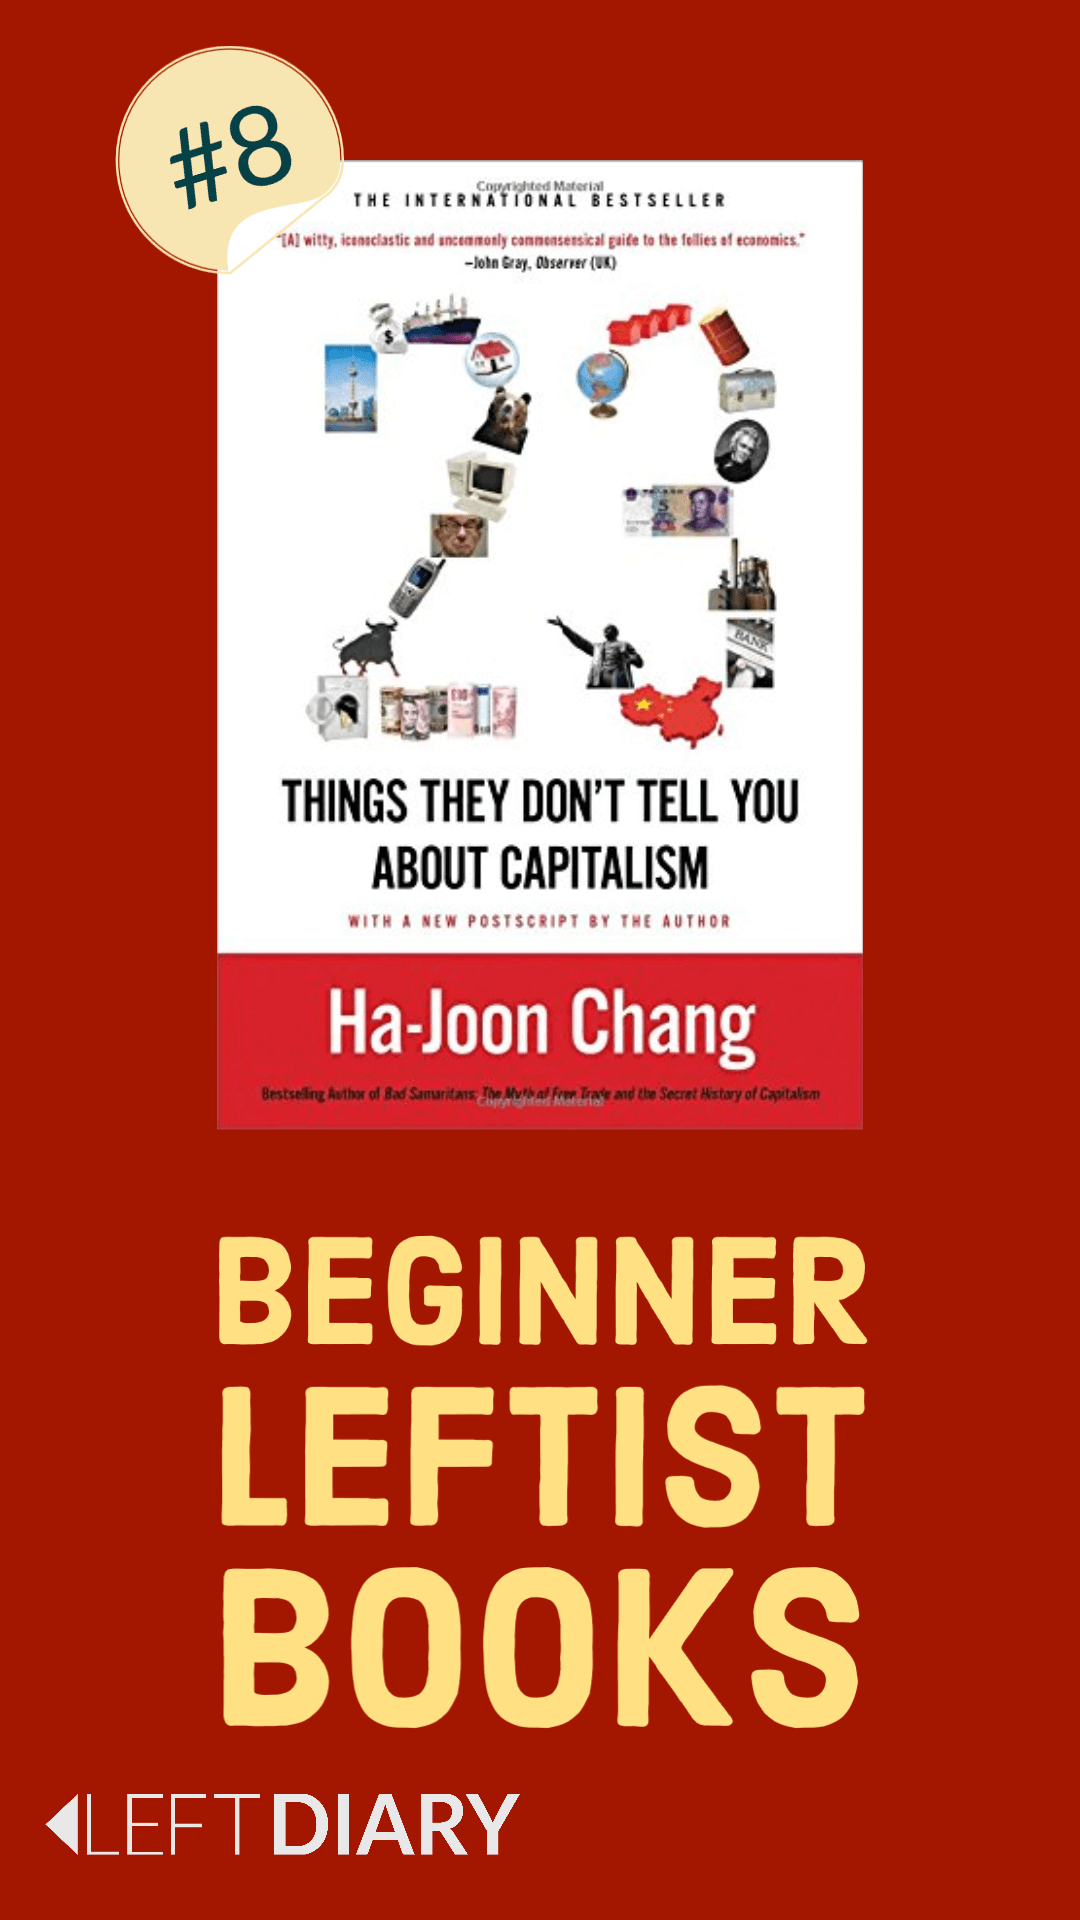 Beginner leftist books 23 things they don’t tell you about Capitalism  Ha-Joon Chang